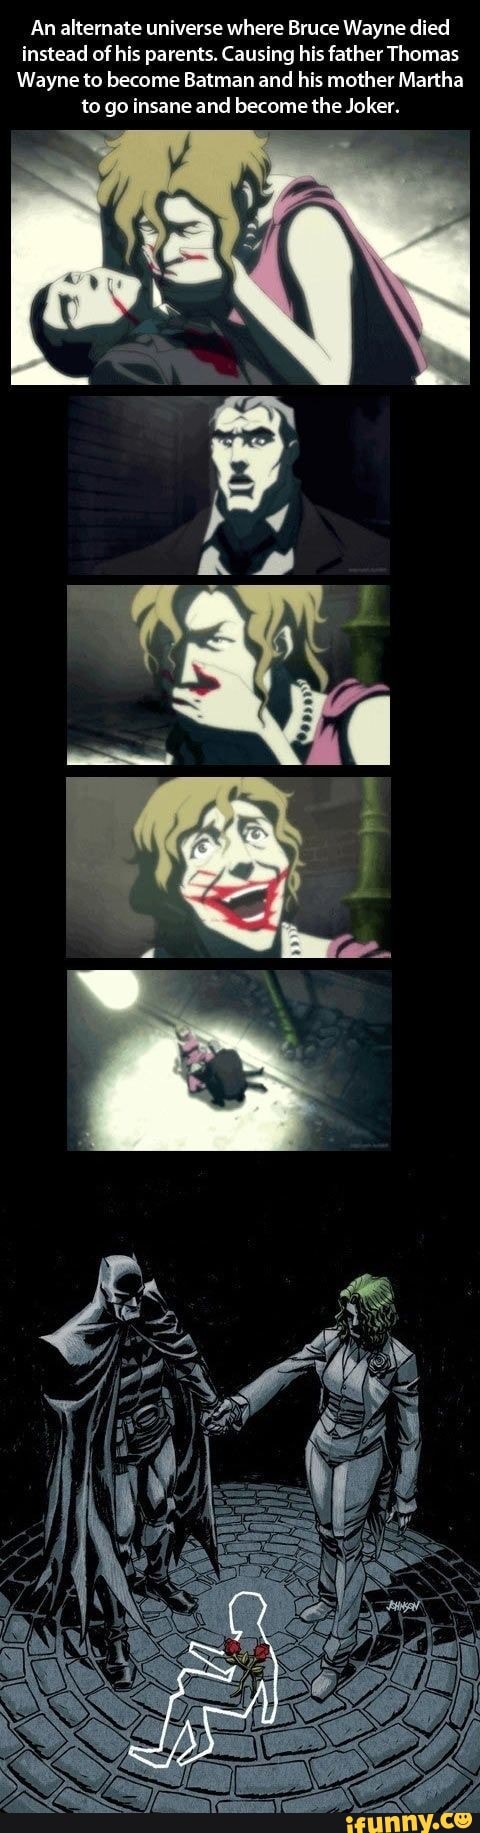 An alternate universe where Bruce Wayne died instead of his parents.  Causing his father Thomas Wayne to become Batman and his mother Martha to  go insane and become the Joker. - iFunny